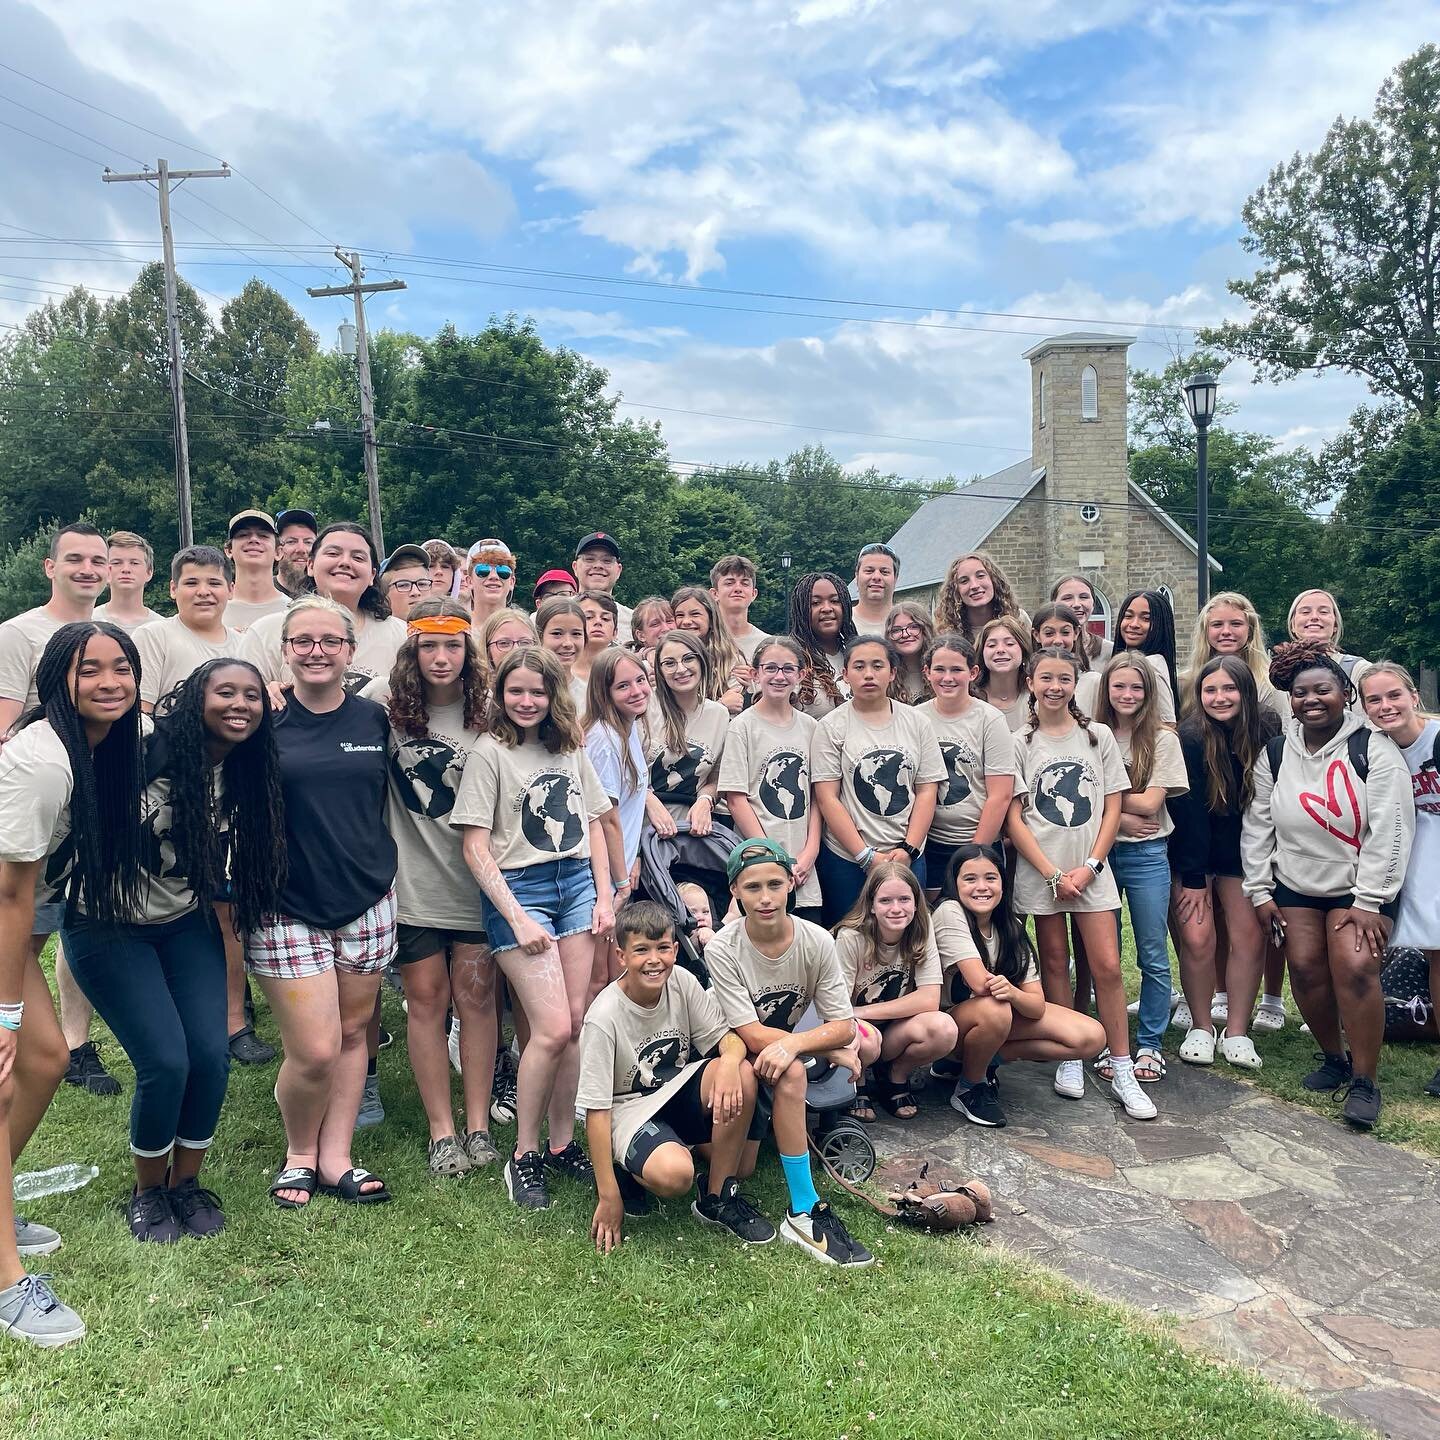 JAC 2022 in the books! God moved in INCREDIBLE ways this past week, and we can honestly say no student left the same as they arrived. Only 51 weeks until JAC 2023 🤪